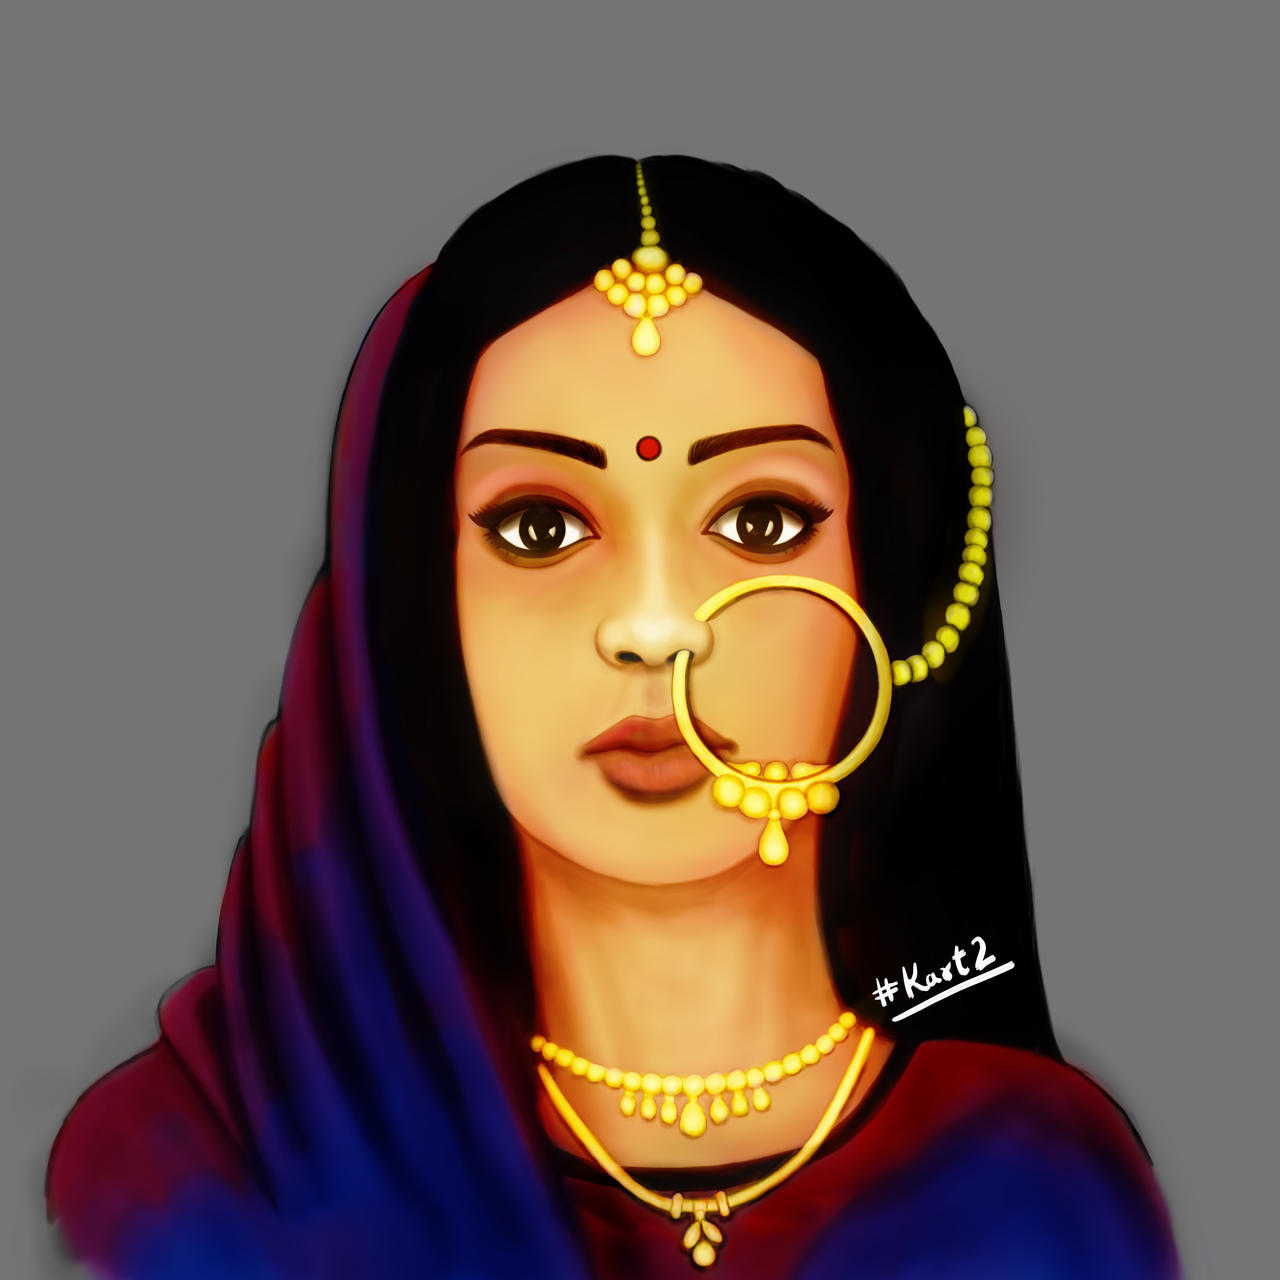 north indian girl 73 by whifog on DeviantArt